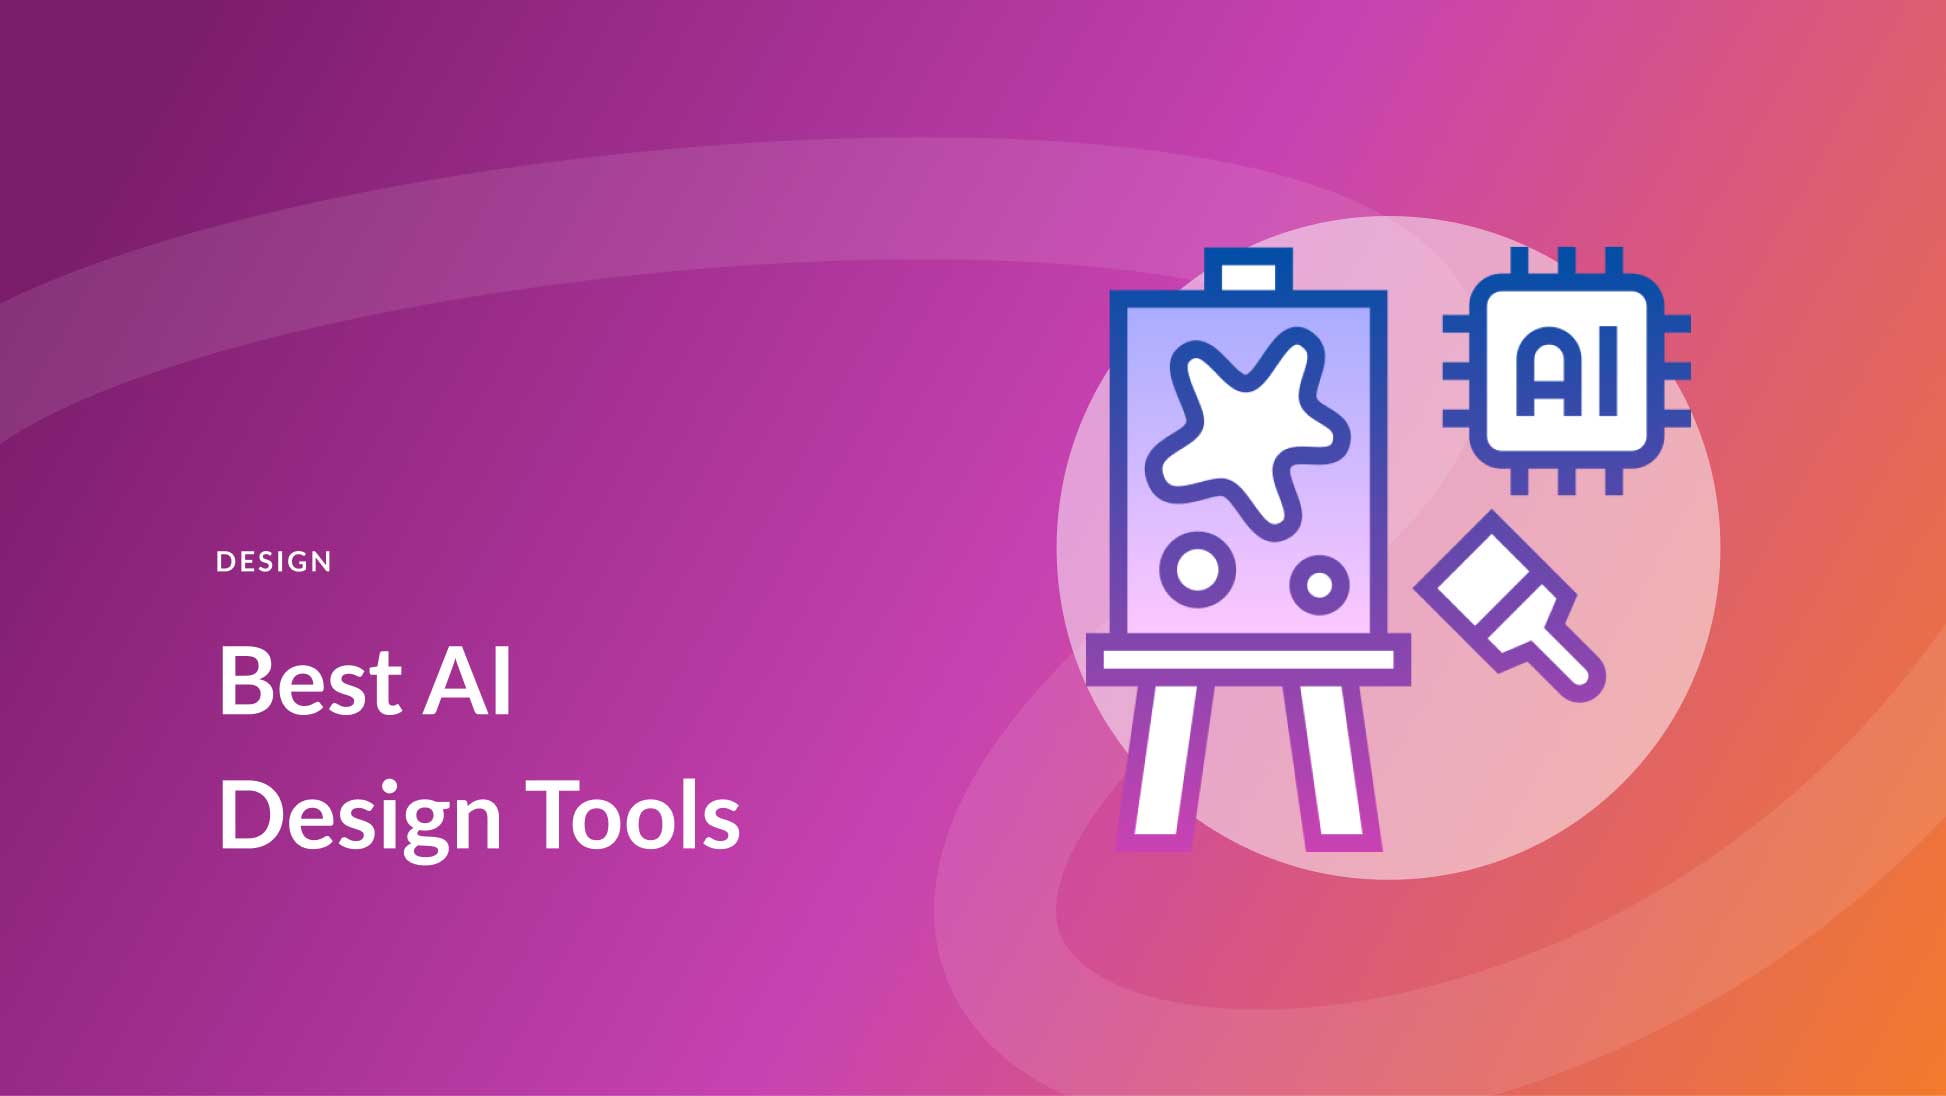 Google Autodraw is a quick way to create copyright-free icons